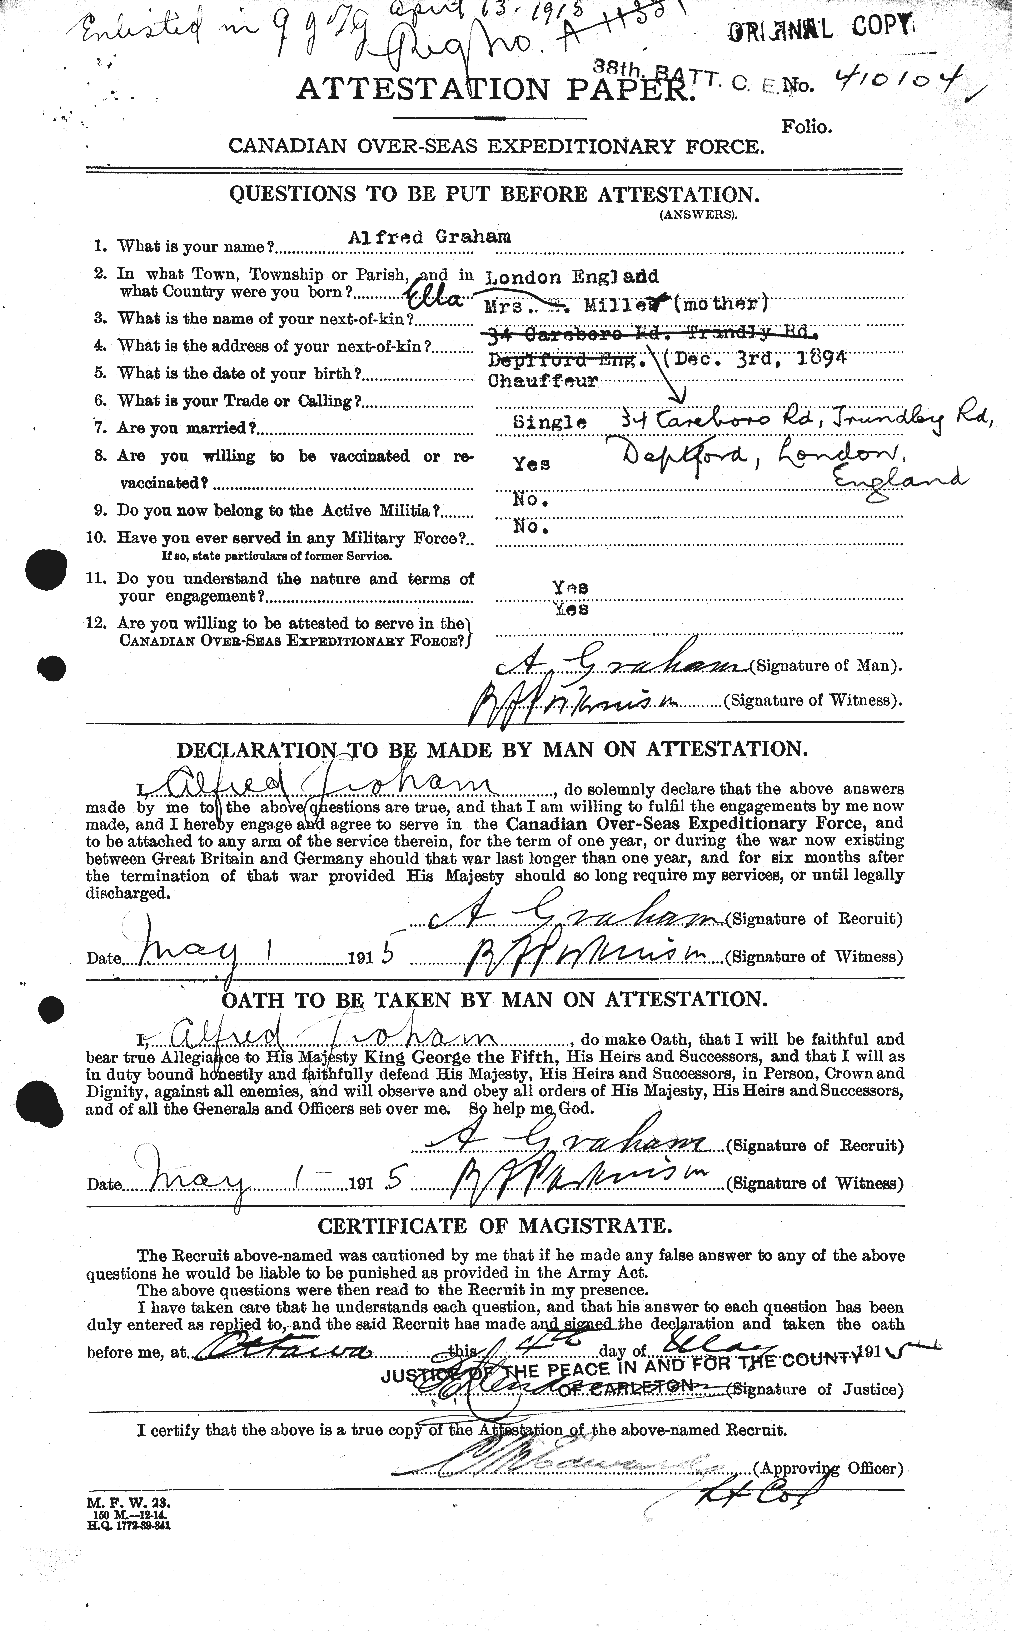 Personnel Records of the First World War - CEF 359595a